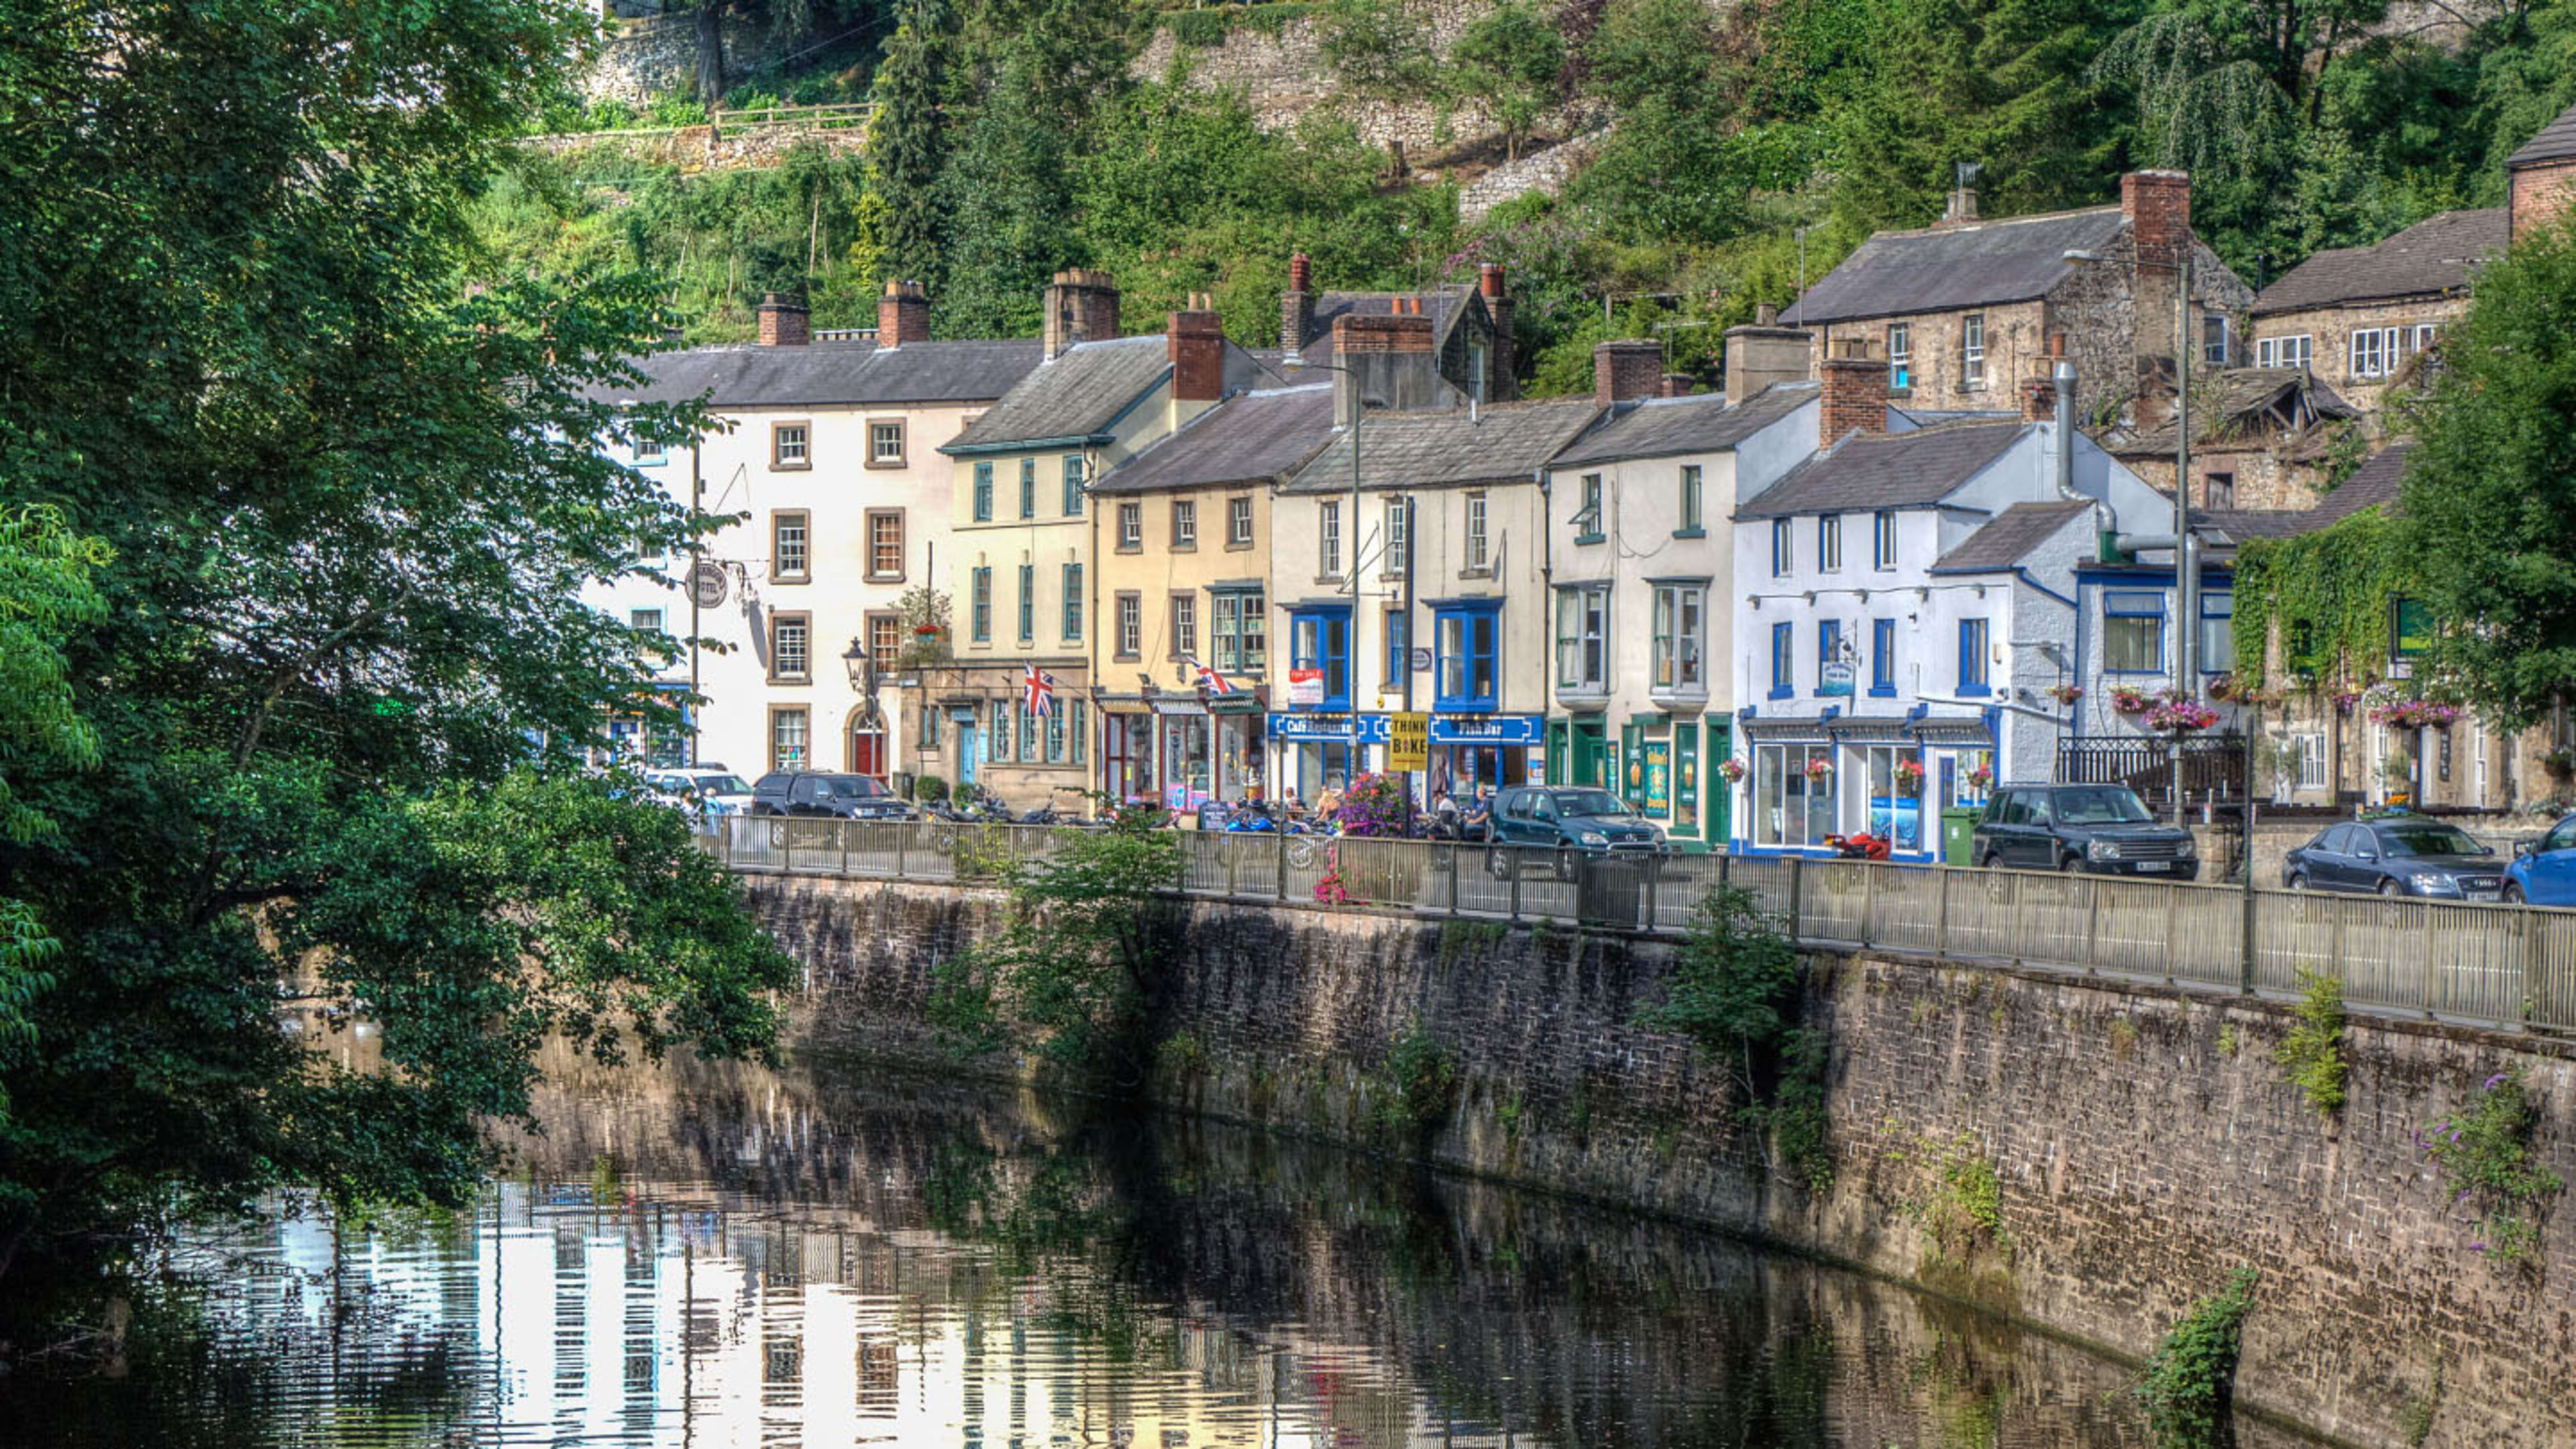 Image of a river and row of houses in Matlock Bath, Peak District